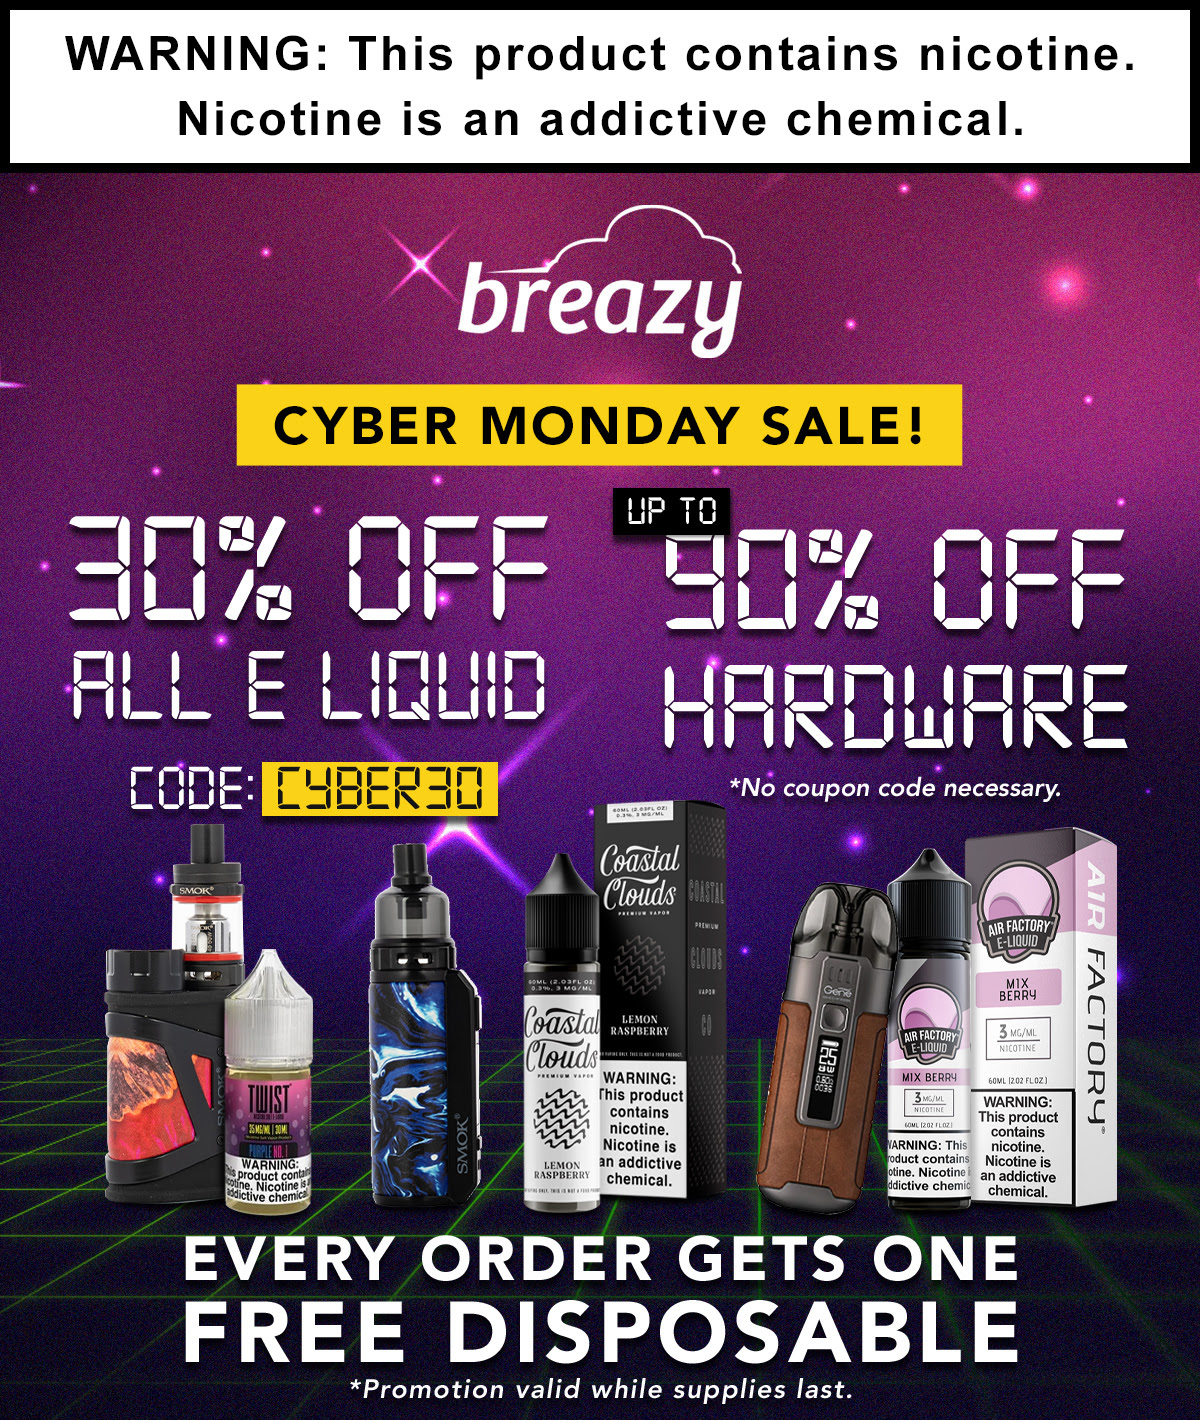 Cyber Monday Sale! 30% Off All E Liquid with code: CYBER30 + Up To 90% Off Hardware